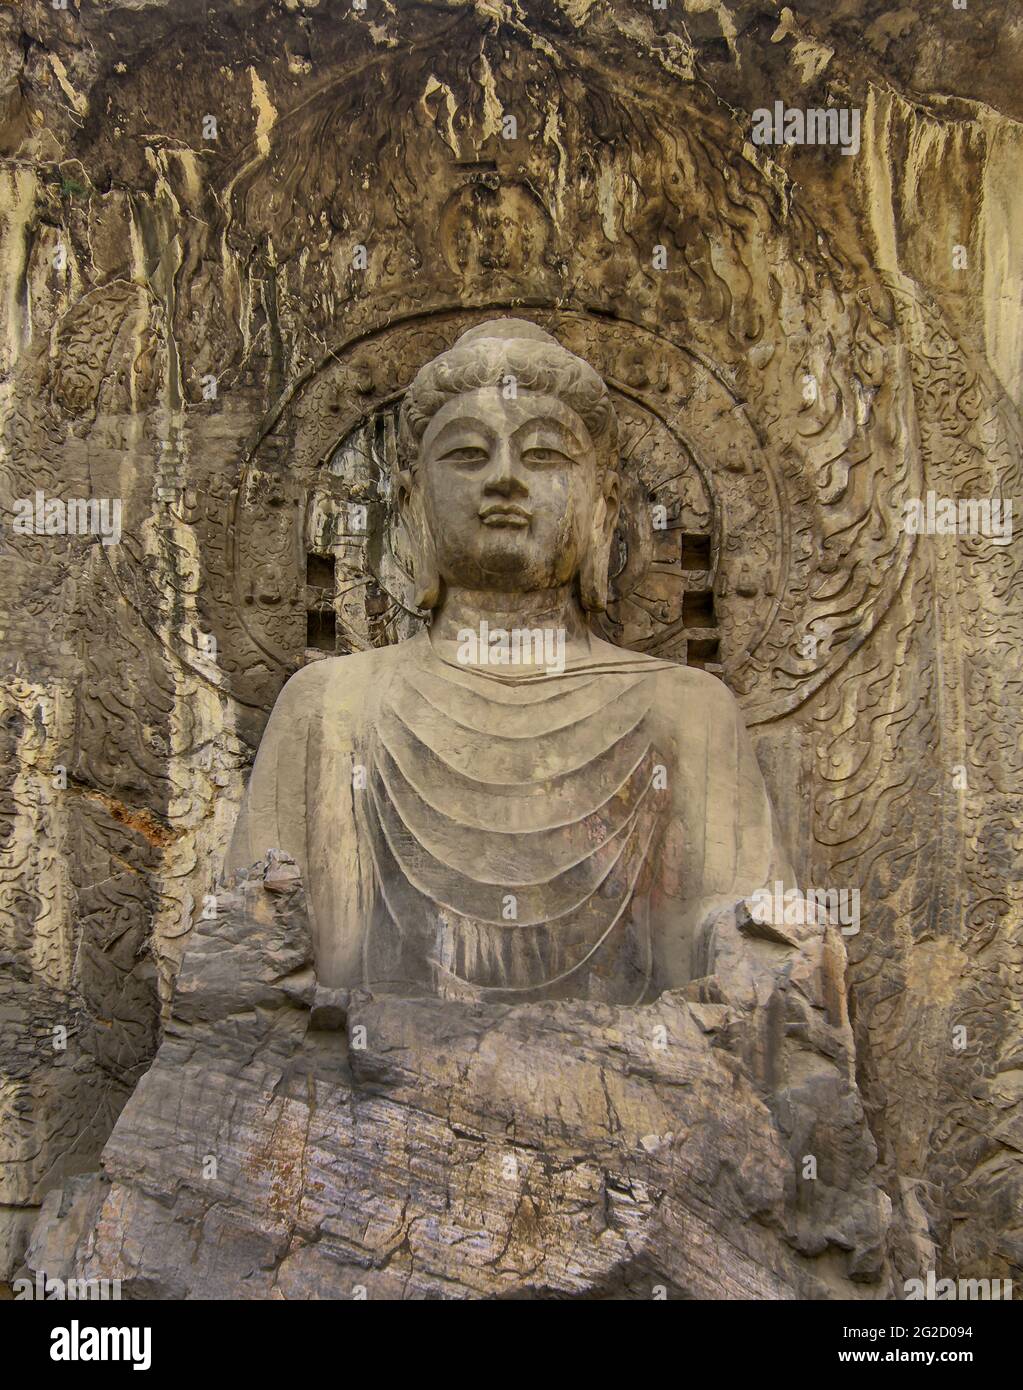 Longmen Grottoes. Laoyang . China.Five Statues. Main wall of Fengxiansi Cave. Second year of(675) of Shangyuan Era of Emperor Gaozong. Tang Dynasty. Stock Photo